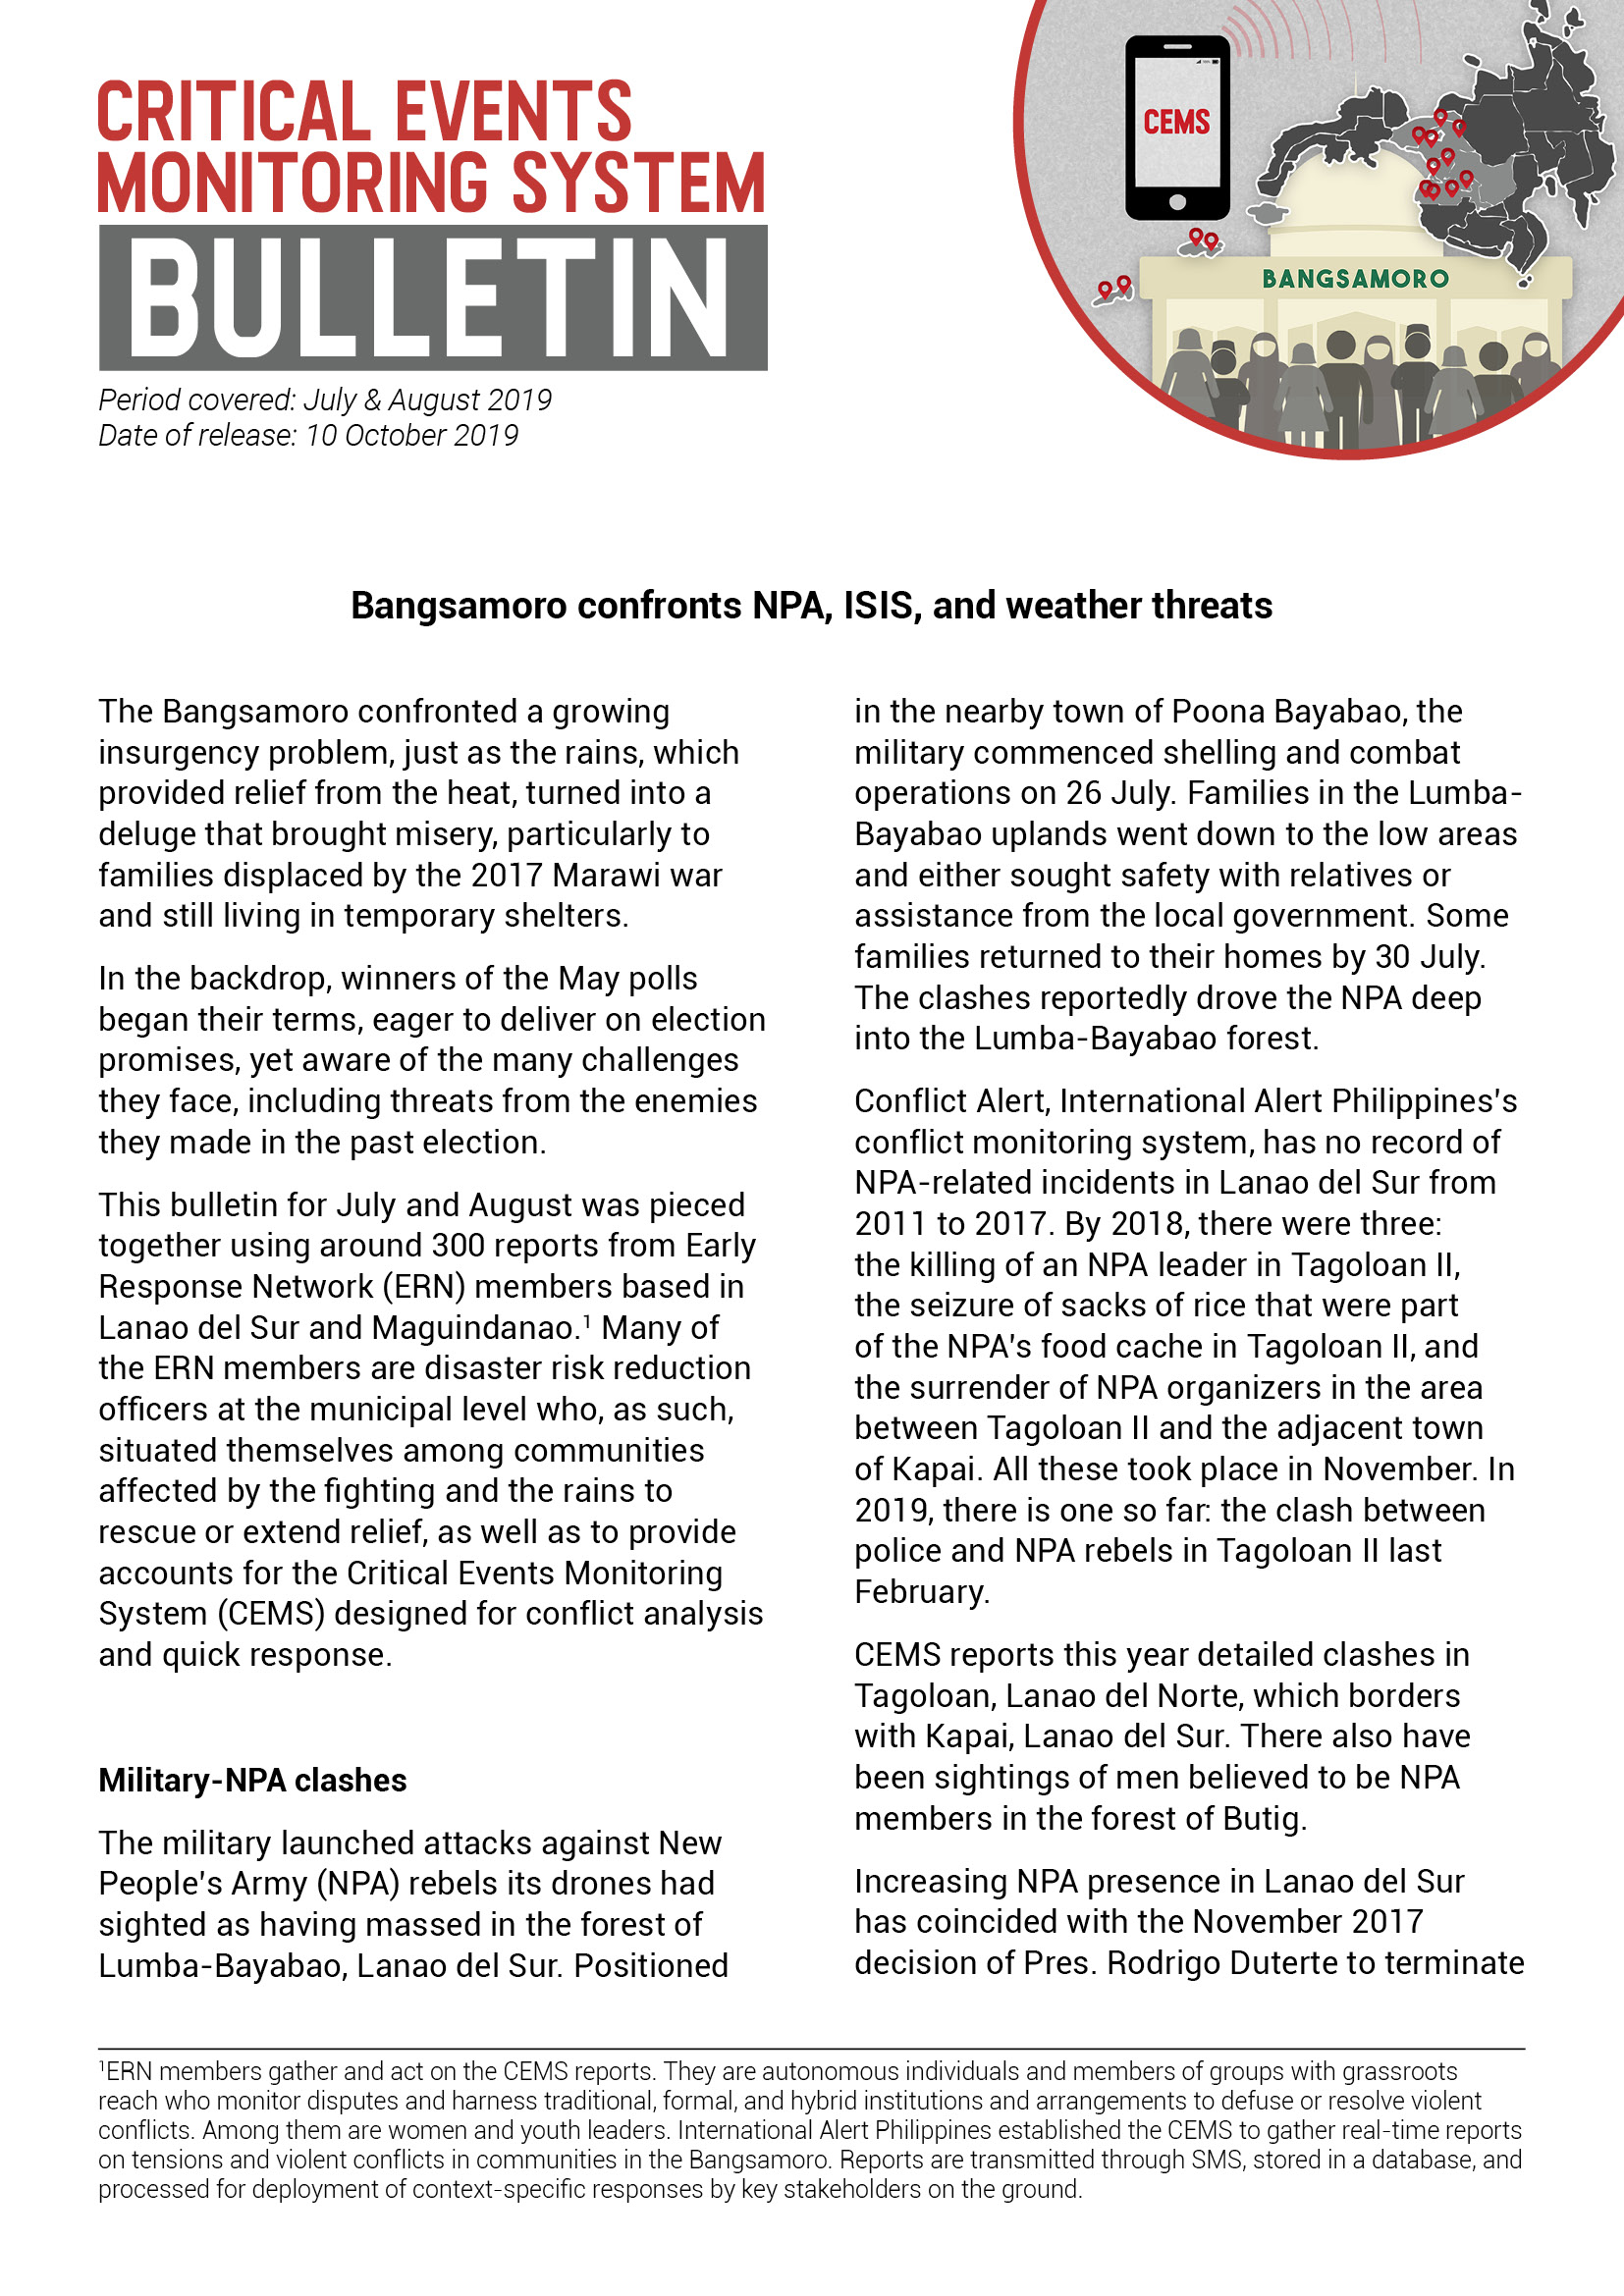 Bangsamoro confronts NPA, ISIS, and weather threats (July & August 2019)